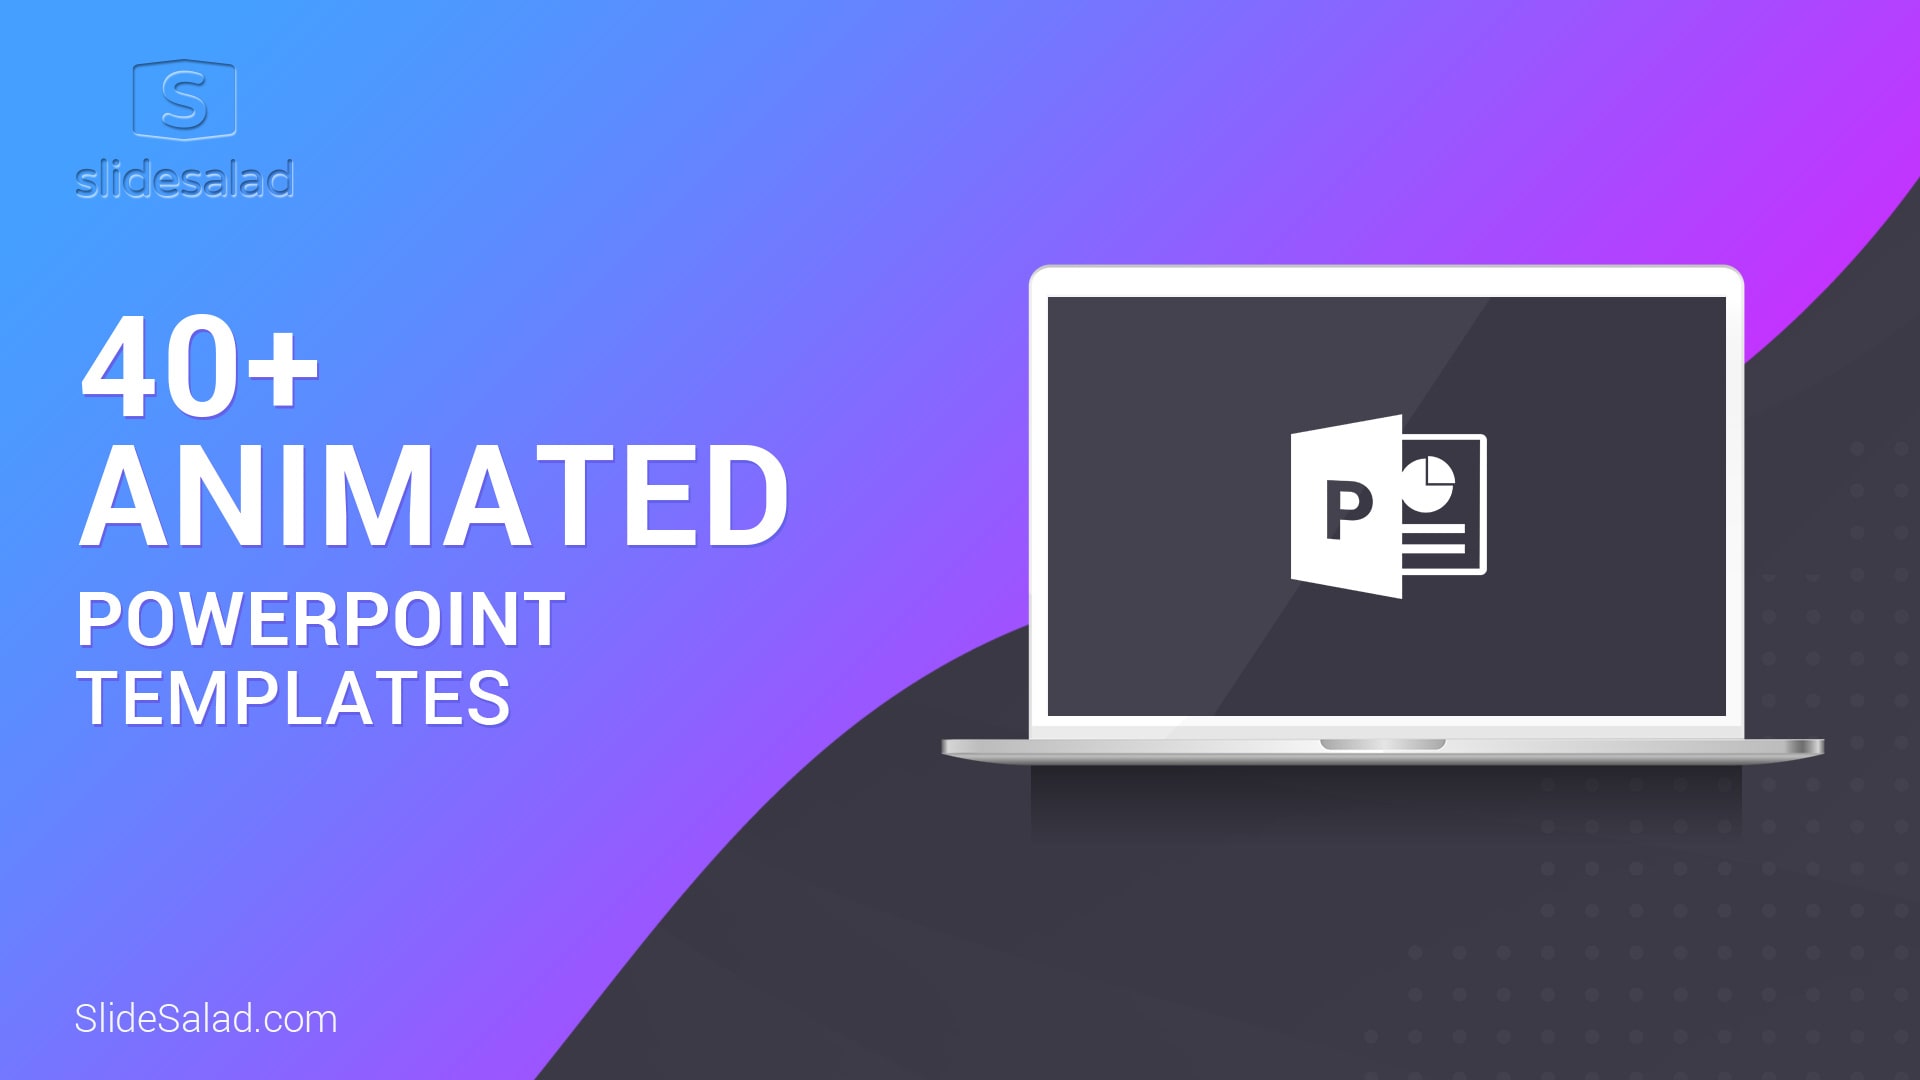 Animated PowerPoint Templates